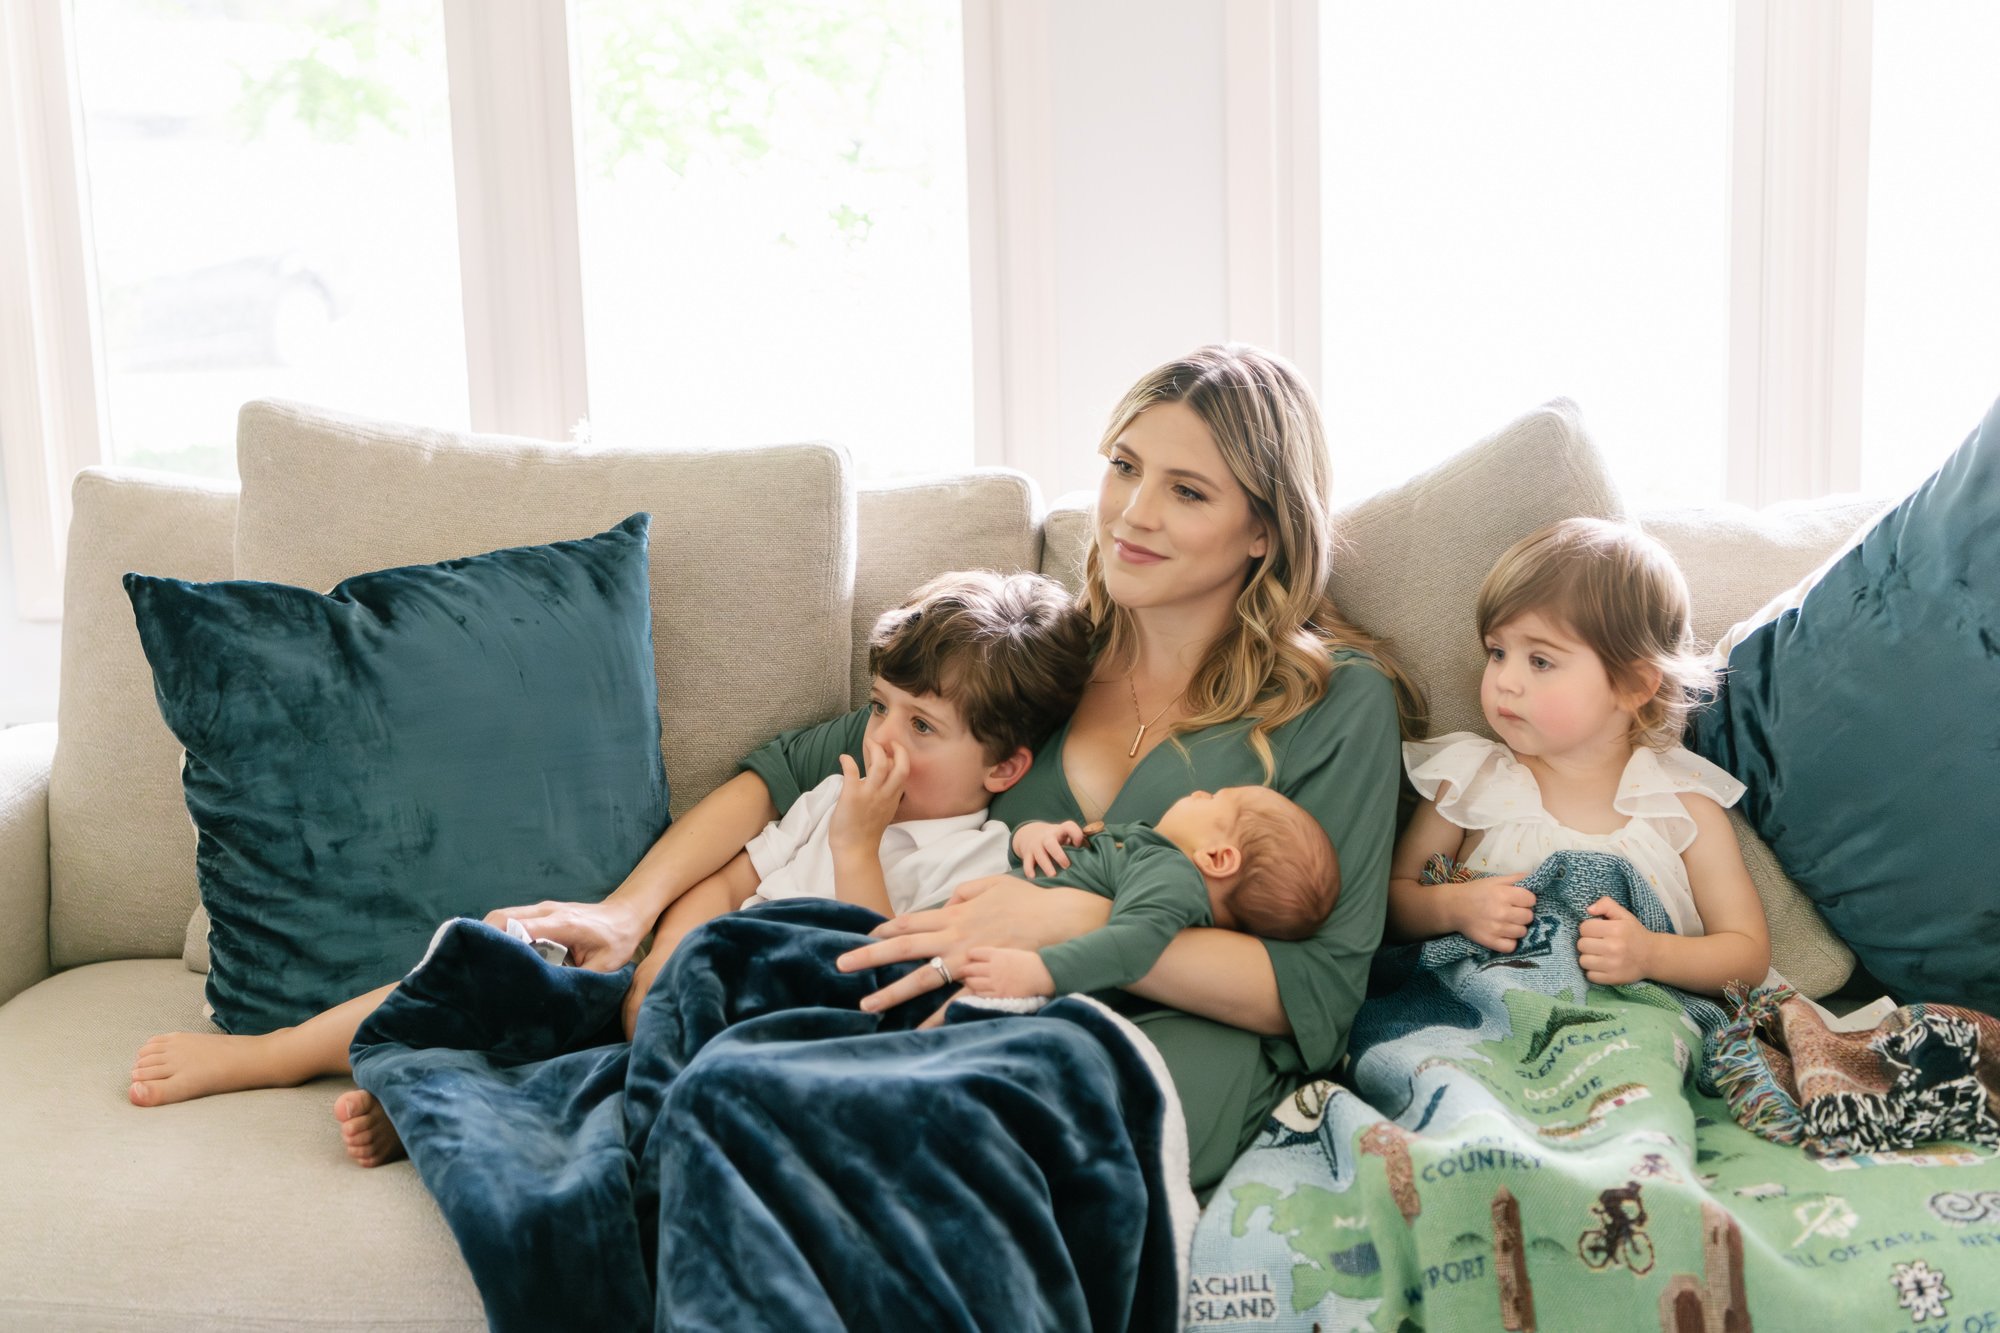  Mother snuggles on the couch with her toddler son and daughter as well as their newborn baby brother to talk and watch a movie as a family. #candidposeinspo #newbornphotography #shorthillsphotographer #familyphotographersinnewjersey #inhomeportraits